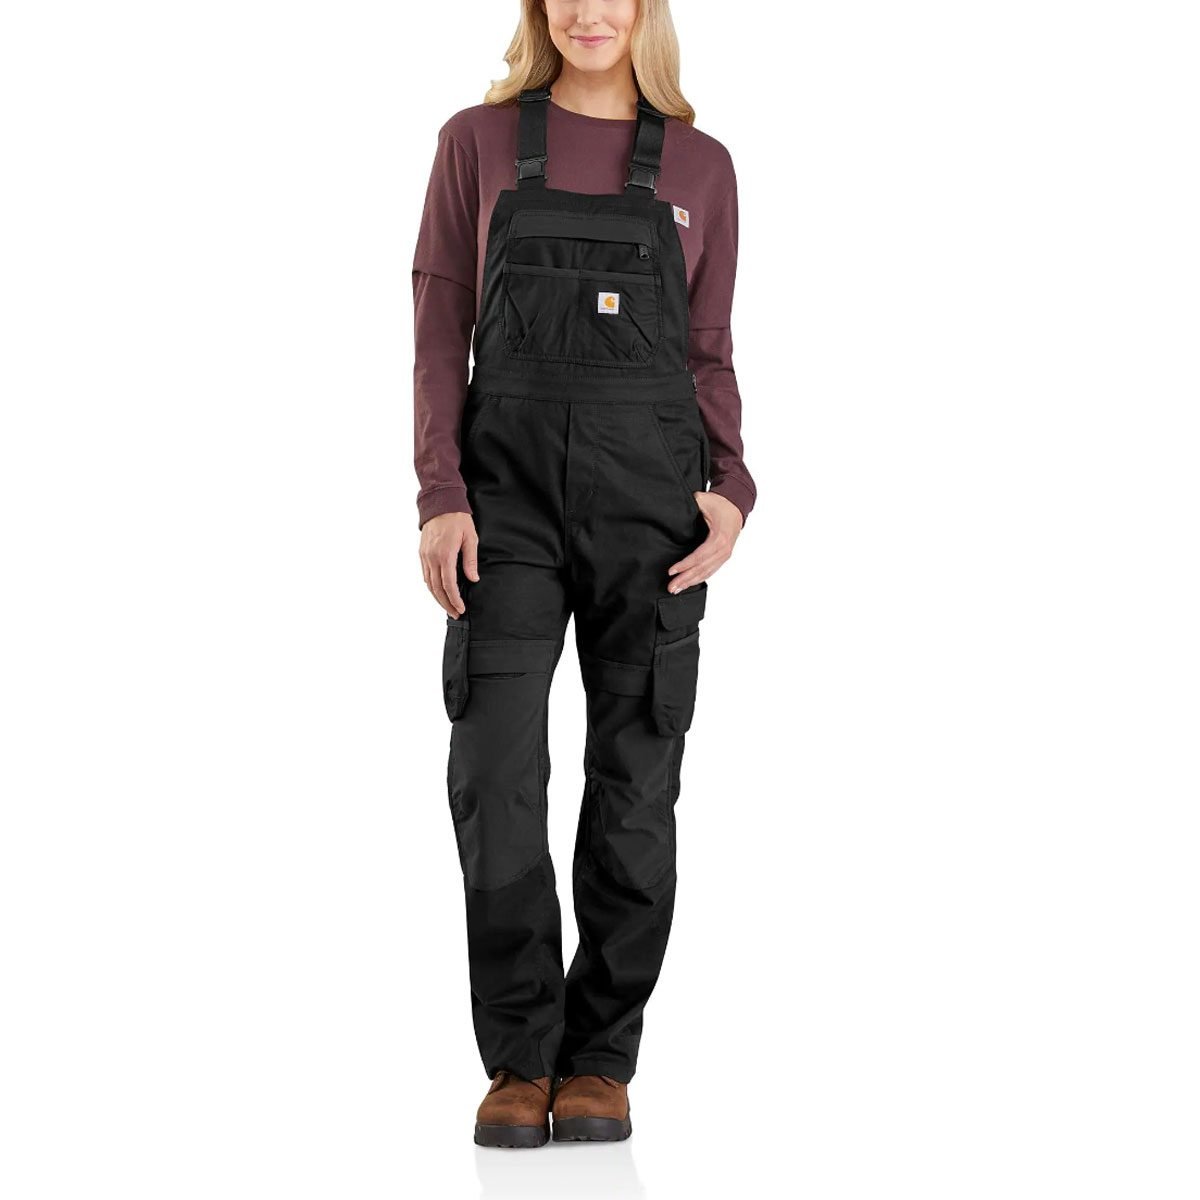 Women's Workwear: 8 Best Places to Shop | The Family Handyman